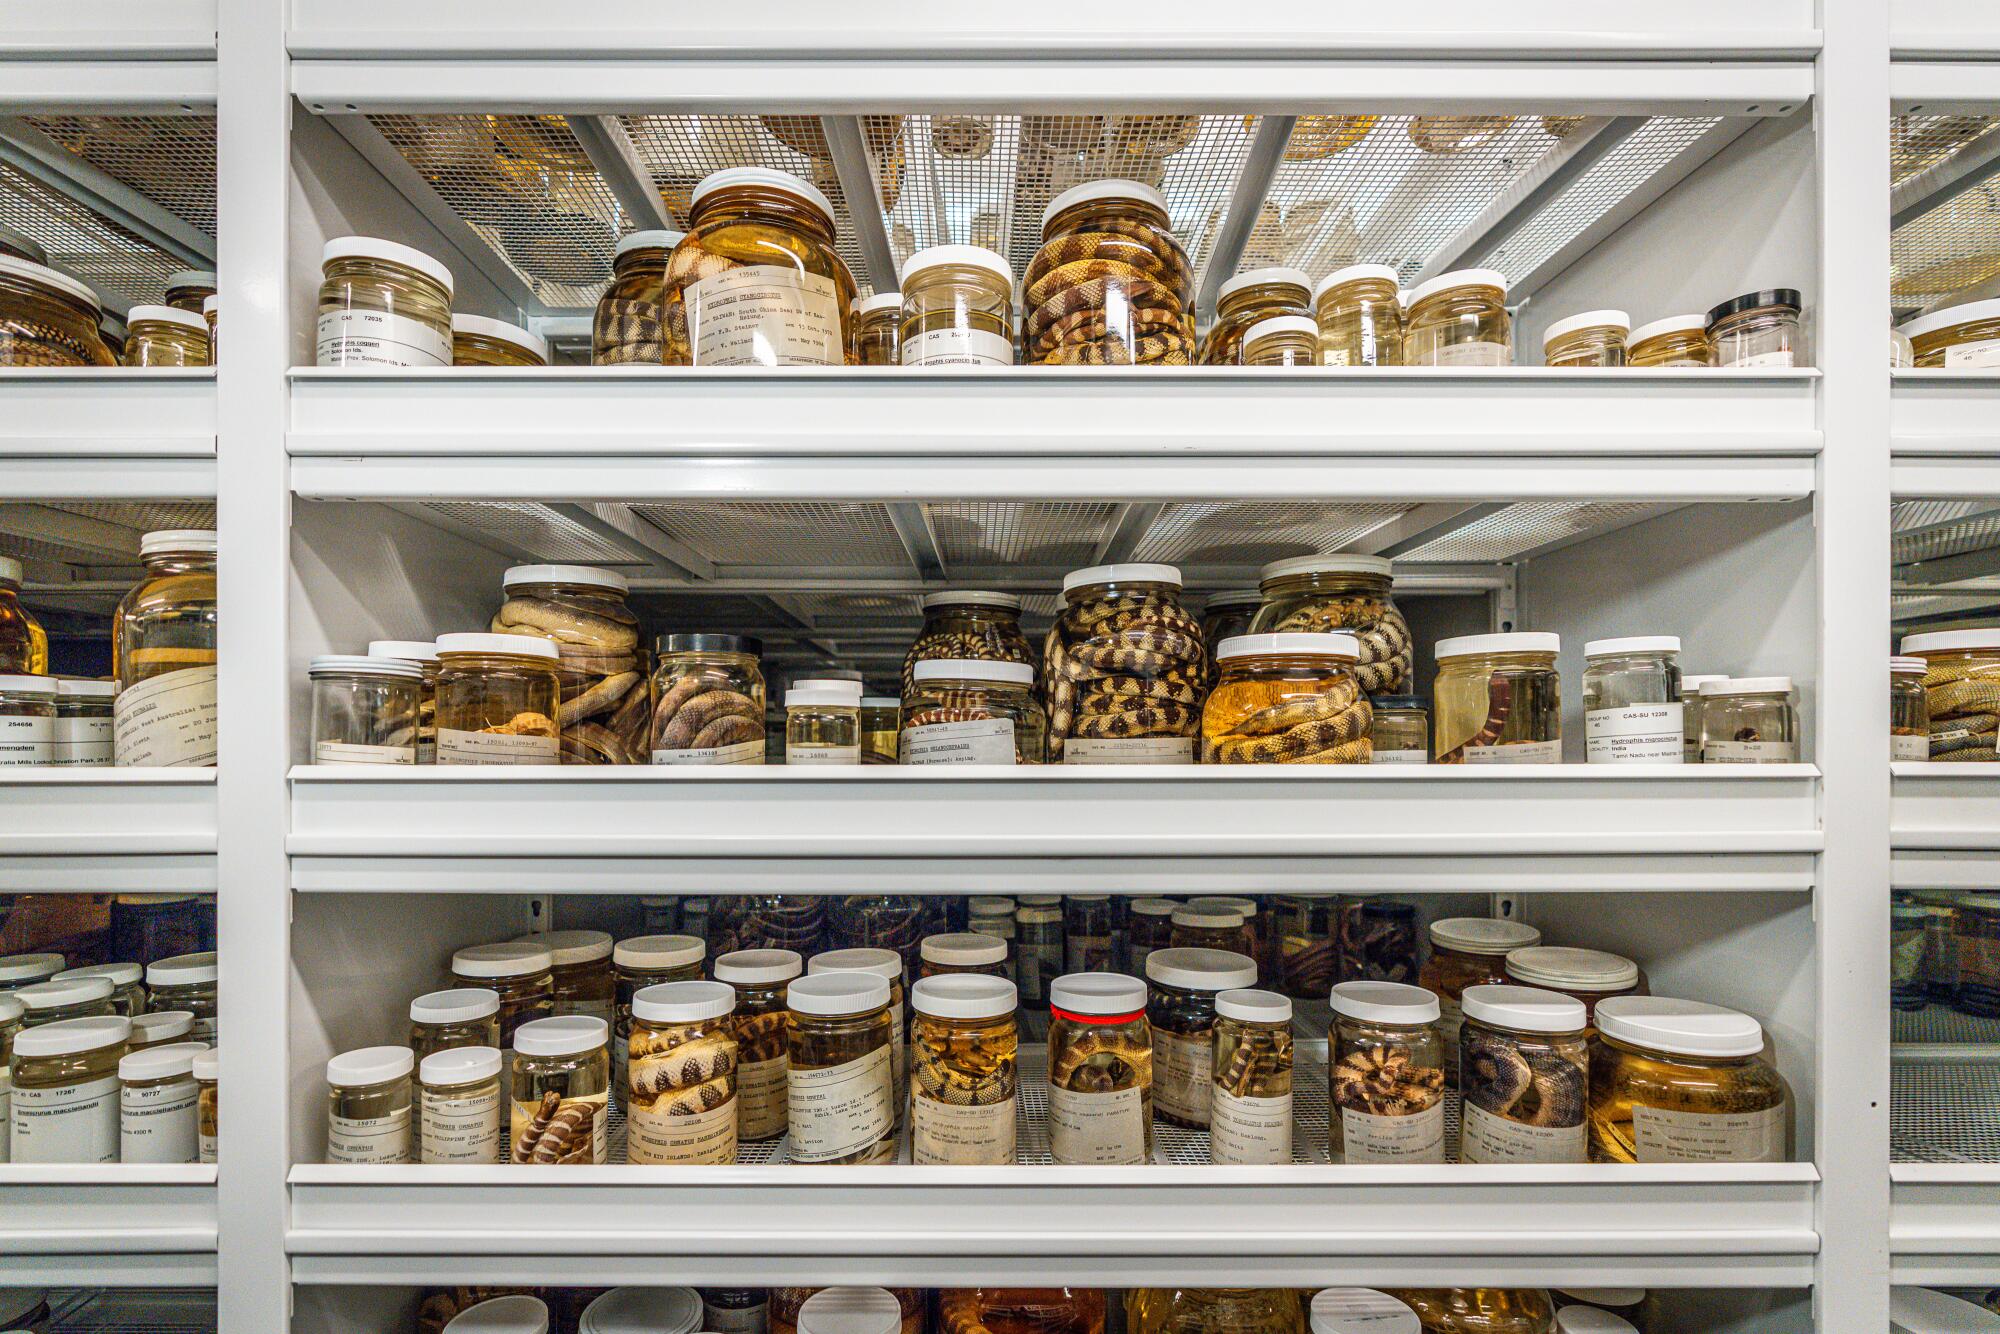 A view of the Herpetology Collection at the California Academy of Sciences in San Francisco.